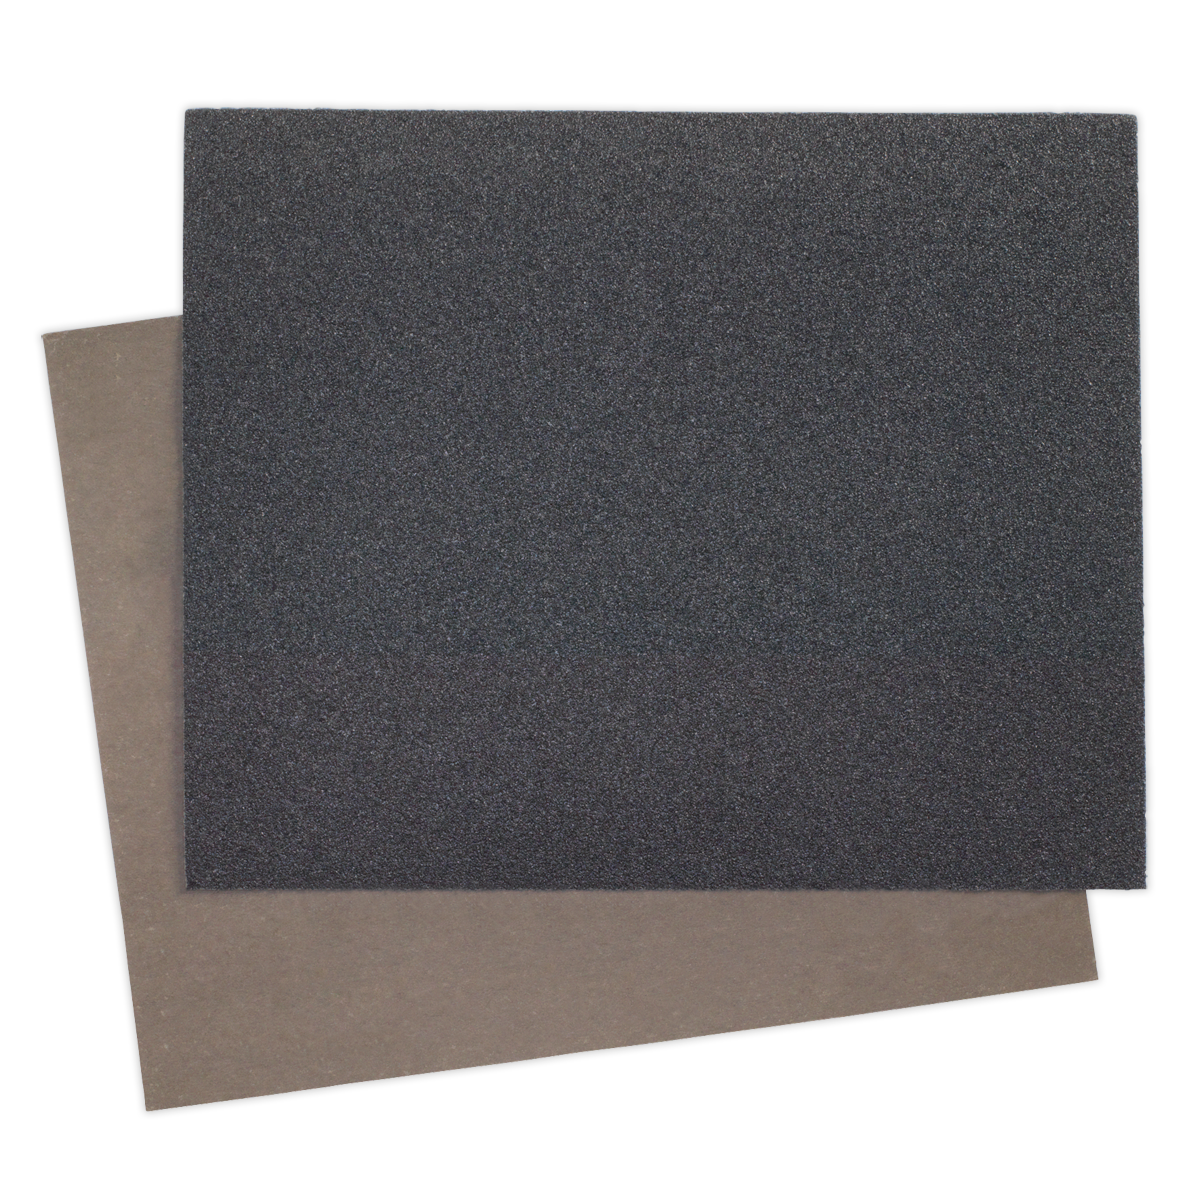 Sealey Wet & Dry Paper 230 x 280mm 1000Grit Pack of 25